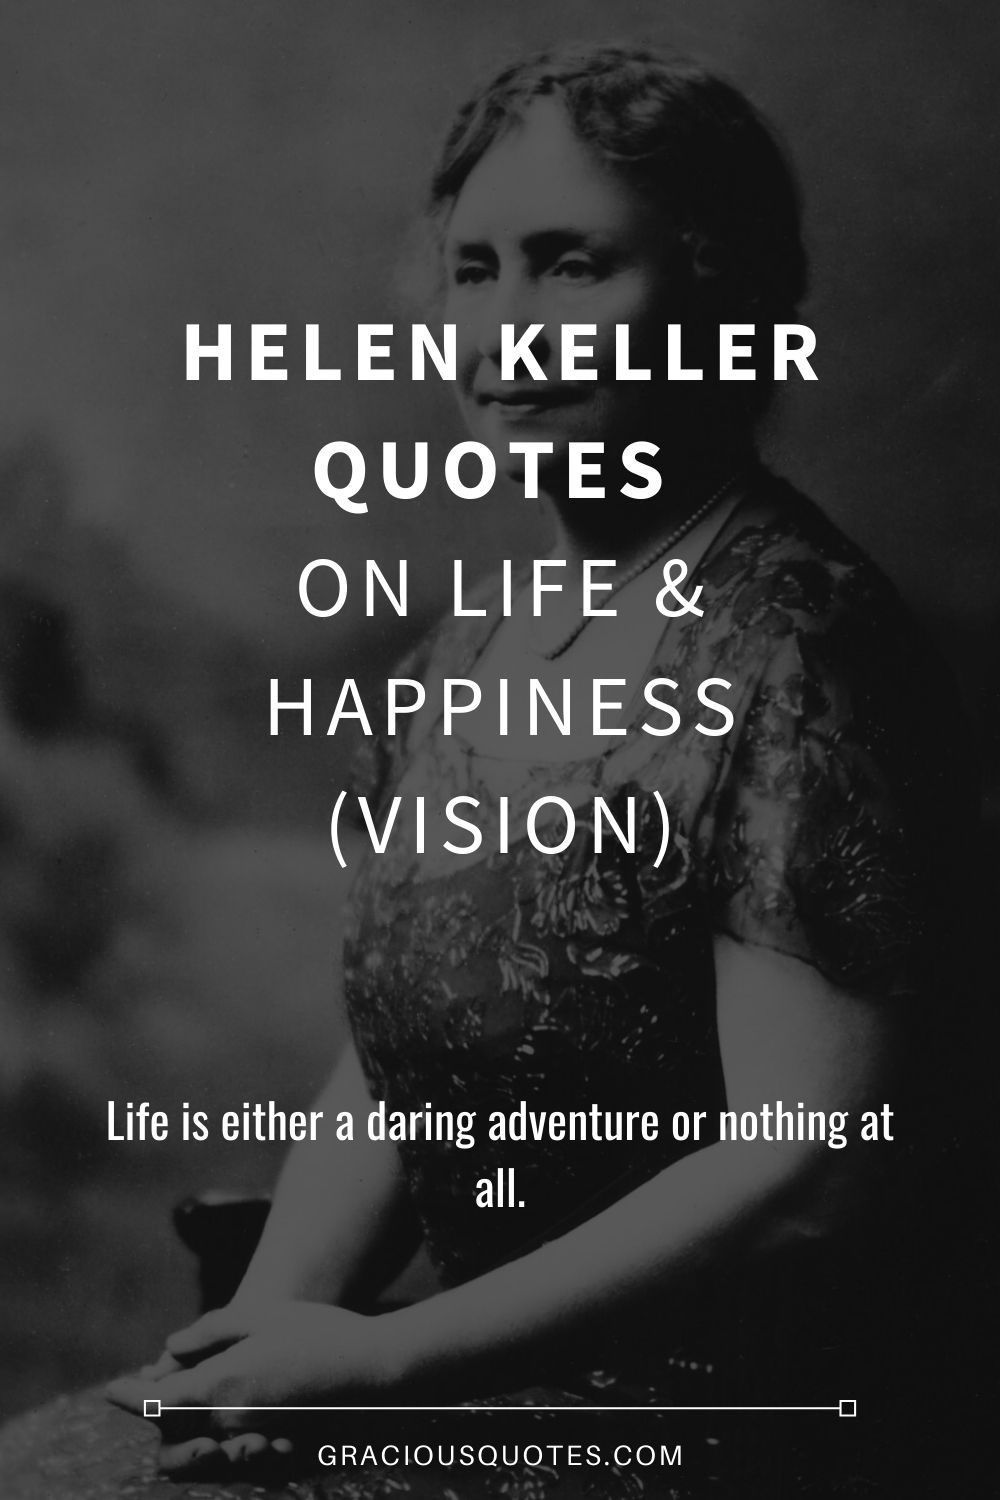 Helen Keller Quotes on Life & Happiness (VISION) - Gracious Quotes